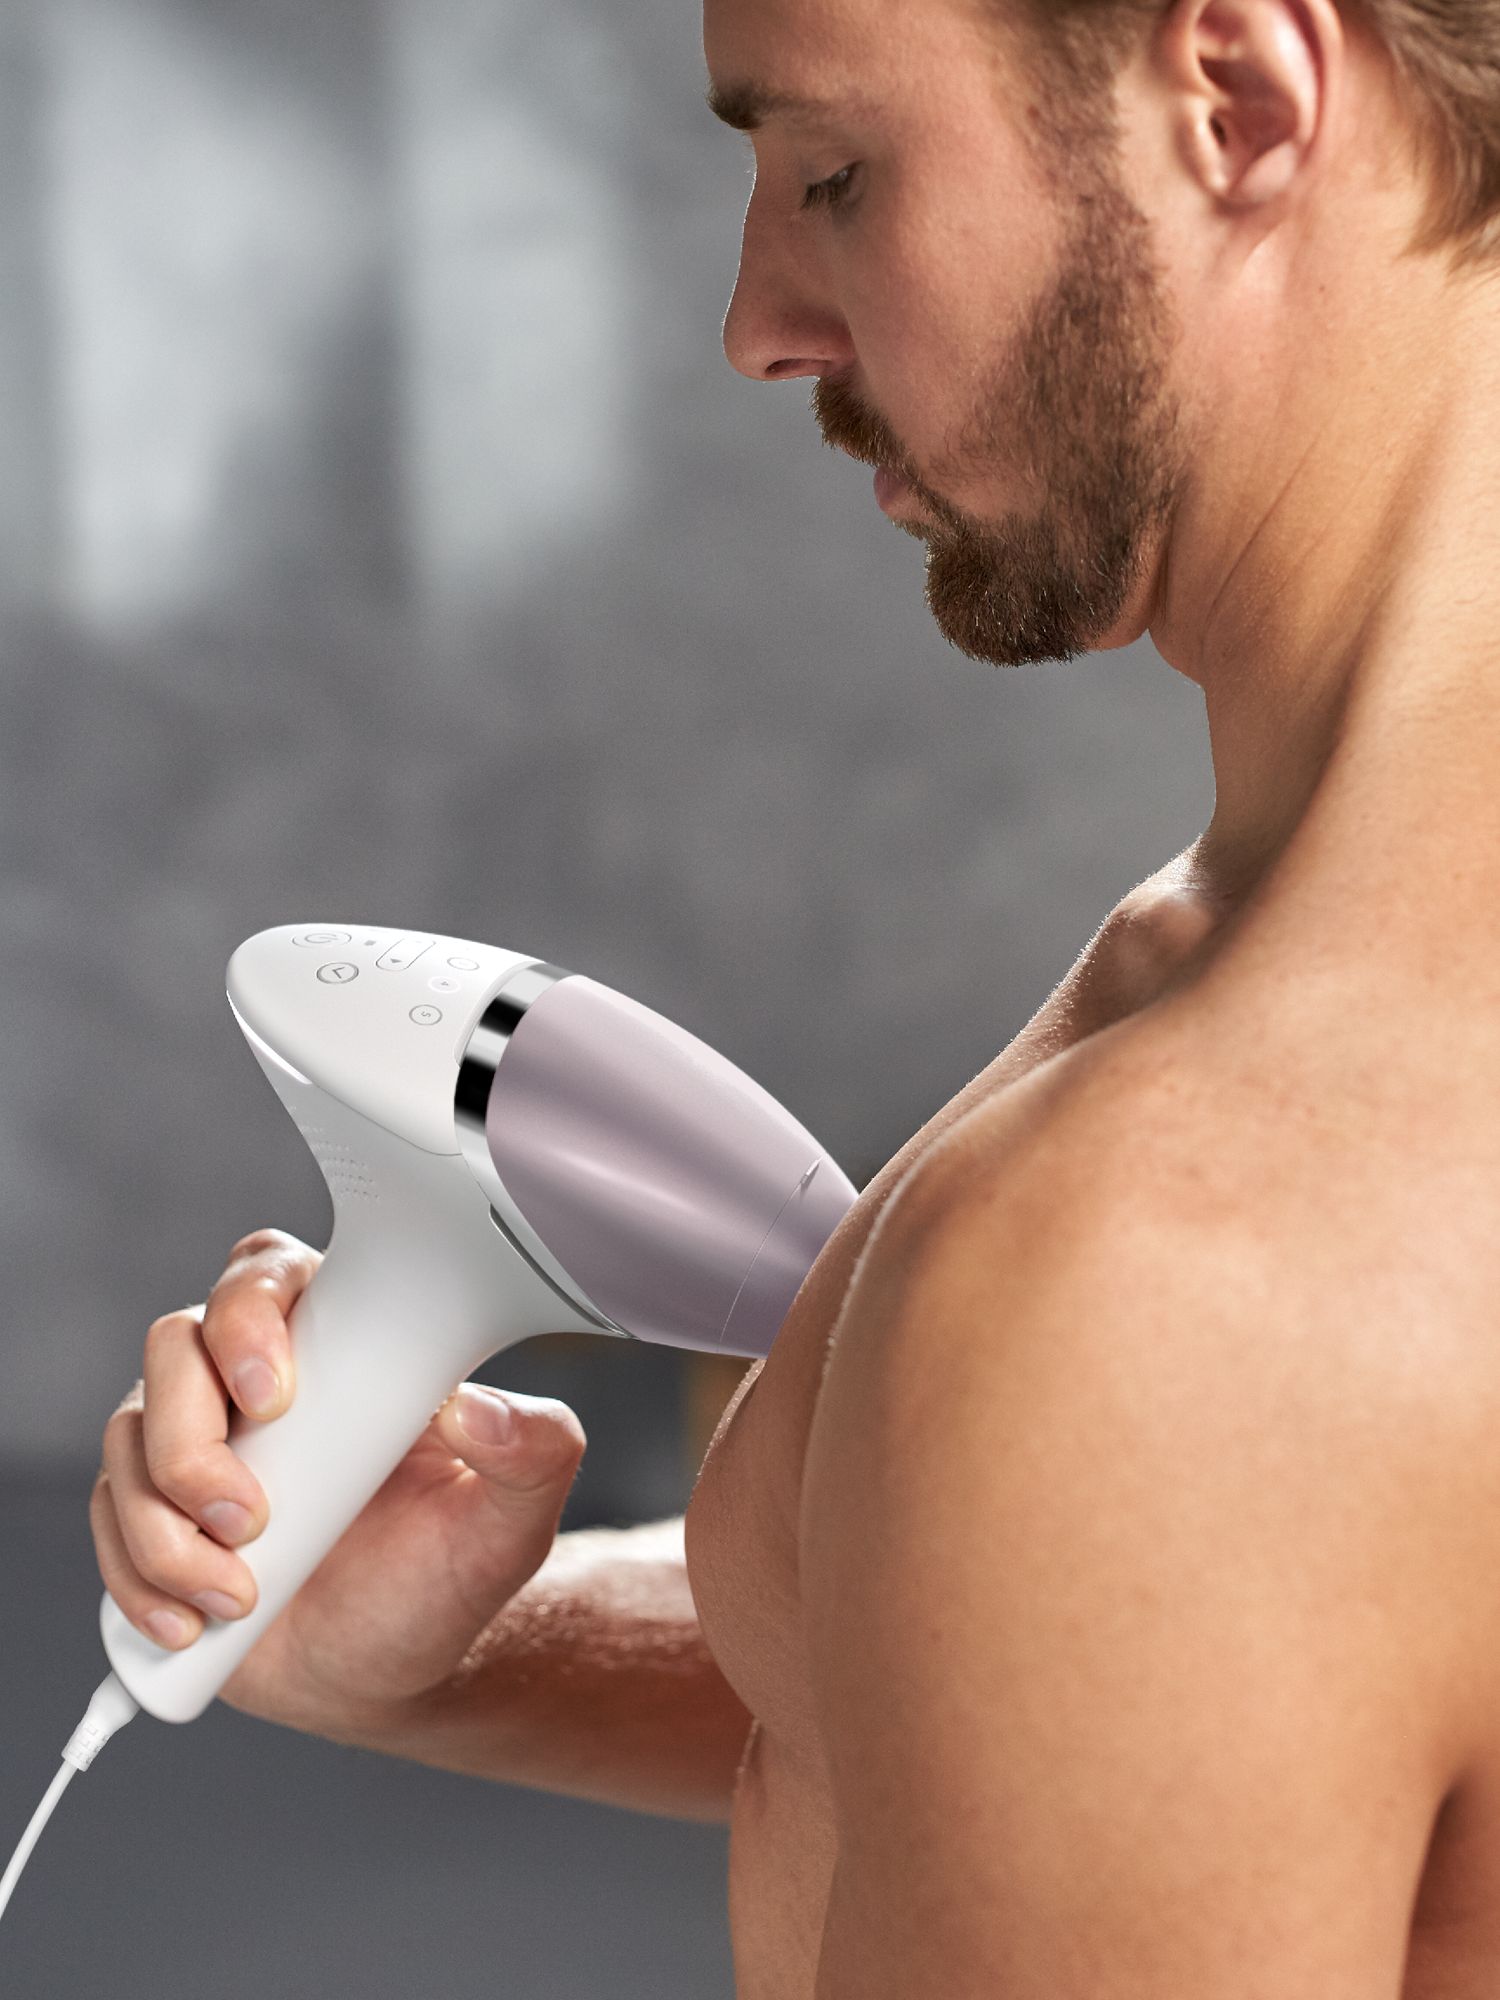 How to Use Philips Lumea IPL Hair Removal